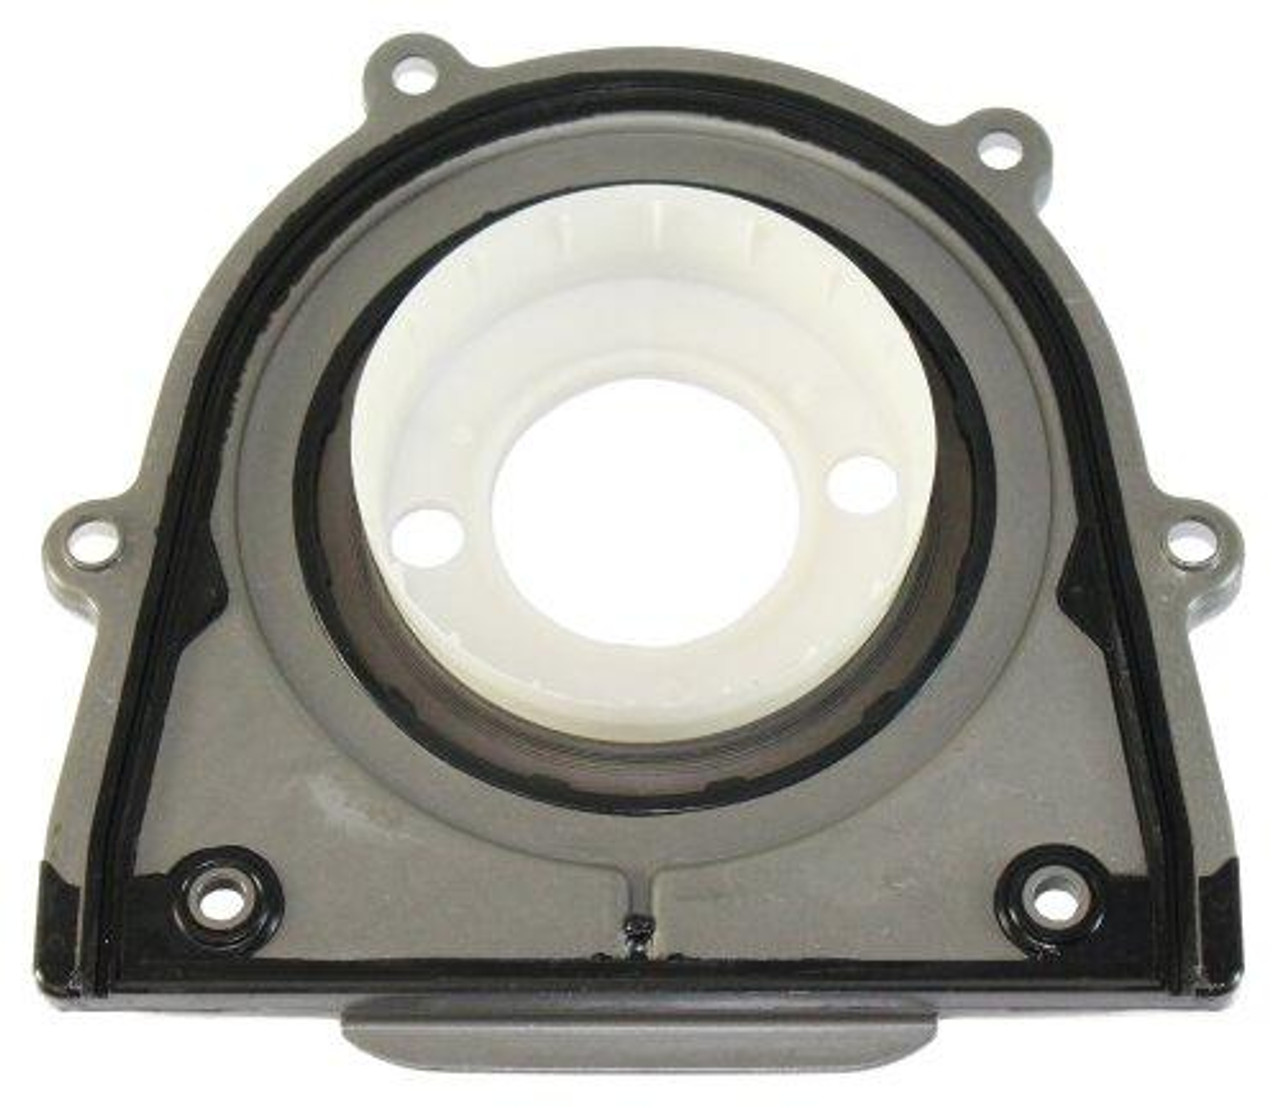 Rear Main Seal - 2011 Ford Ranger 2.3L Engine Parts # RM446ZE84